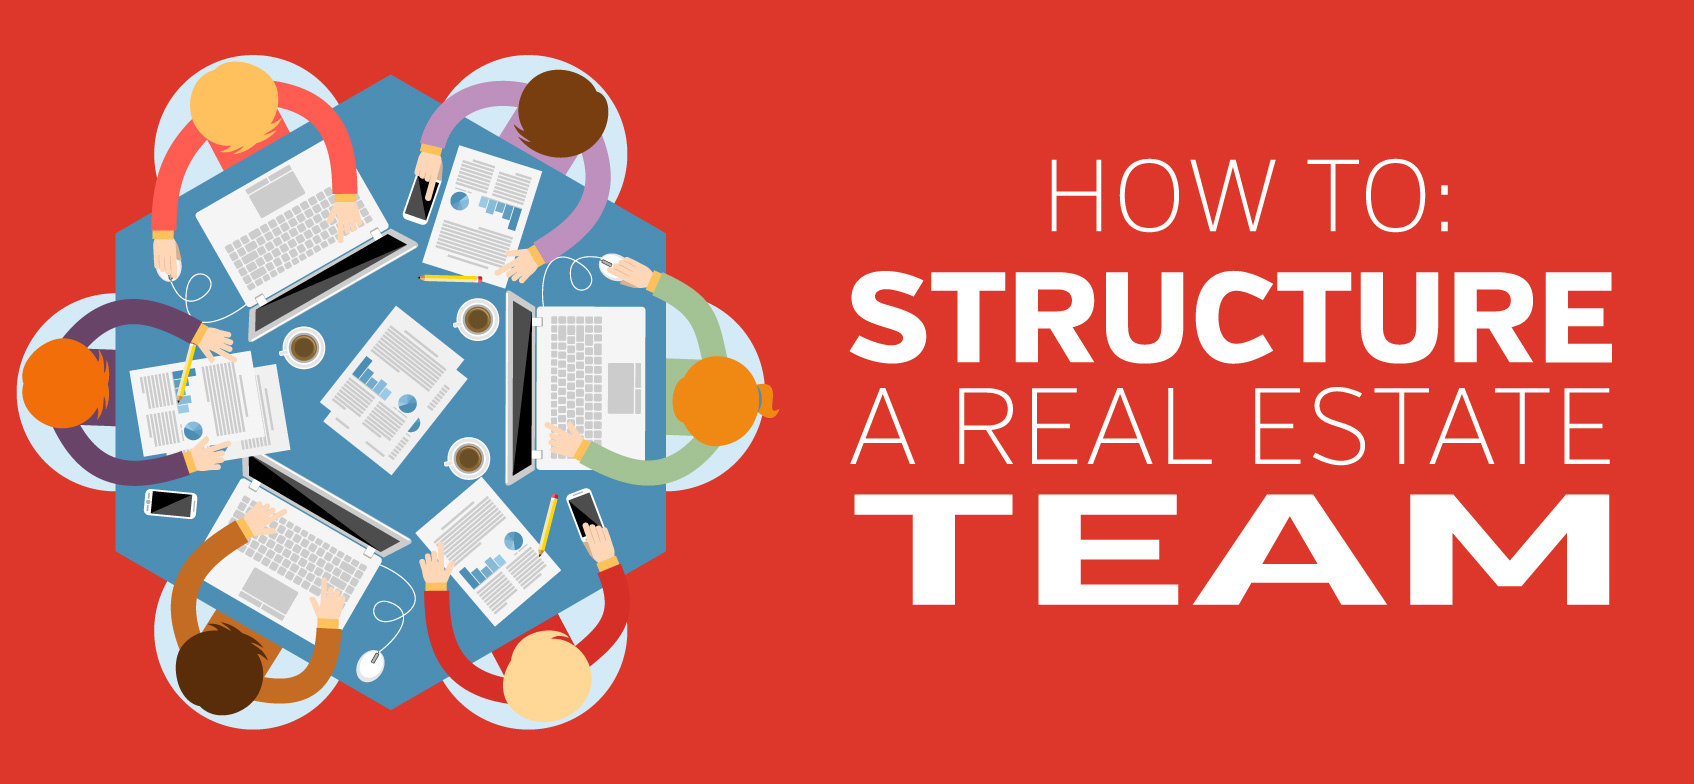 how to structure real estate teams